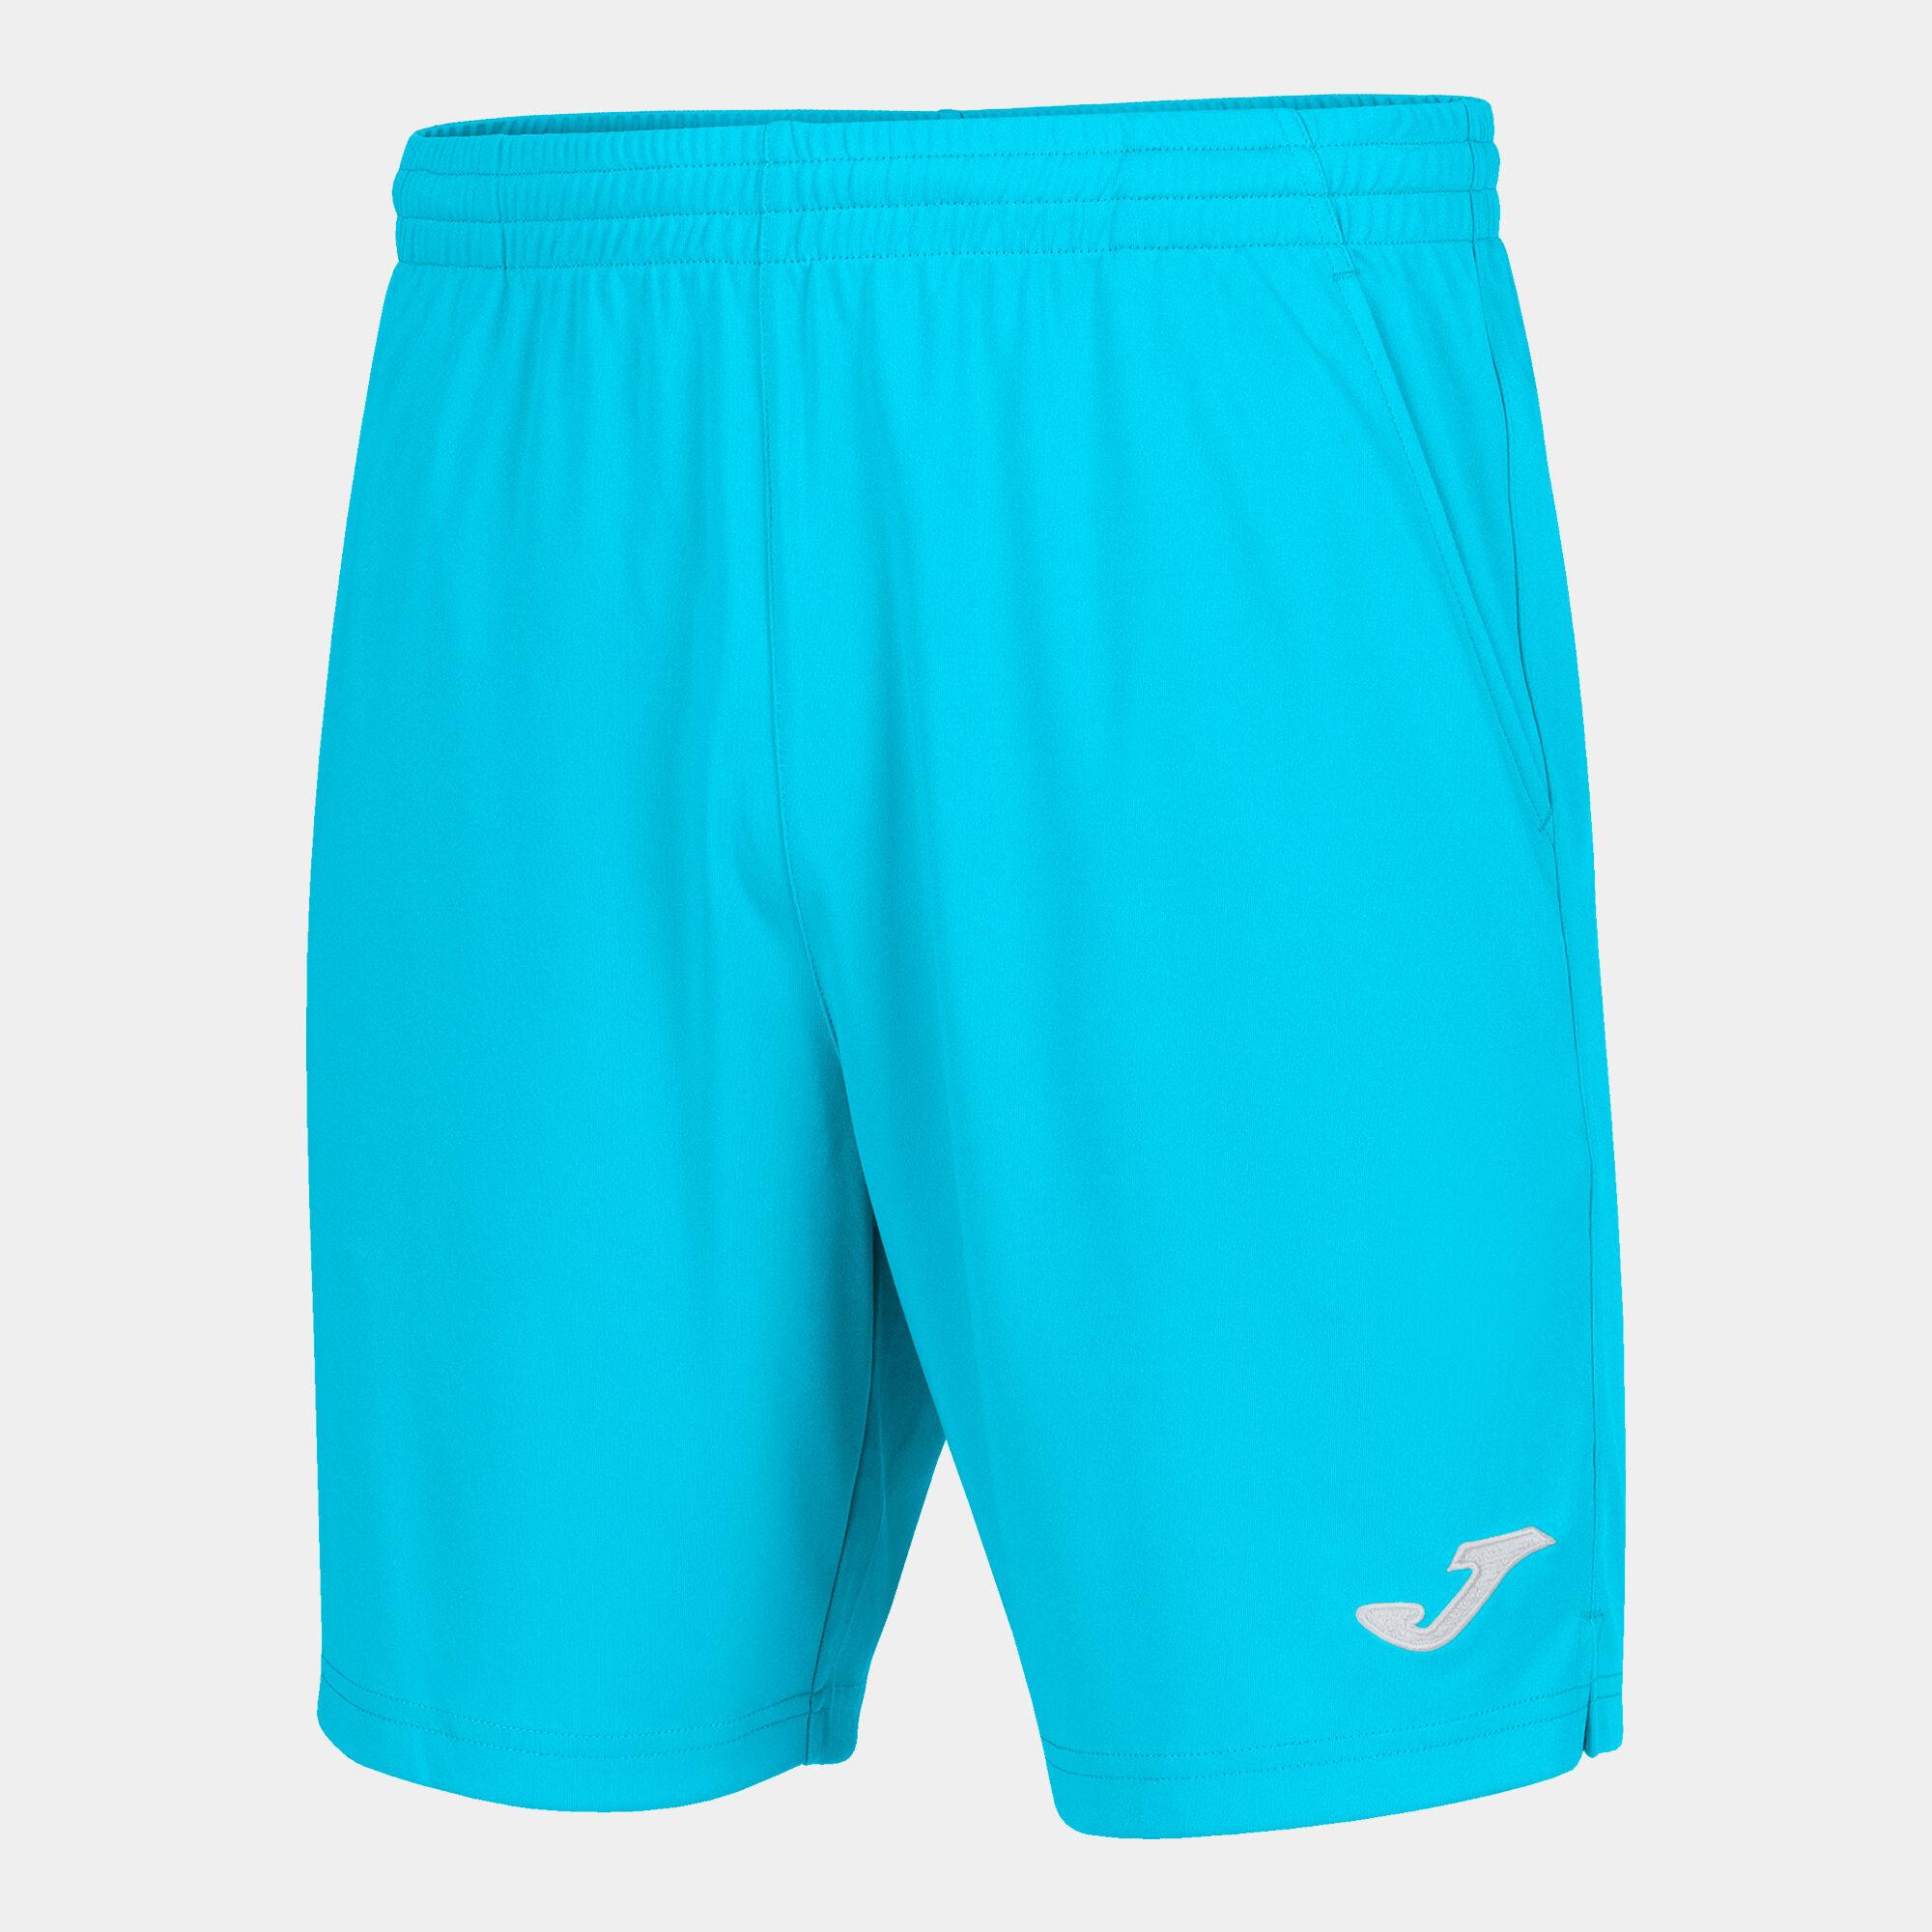 BERMUDA HOMME DRIVE TURQUOISE FLUO